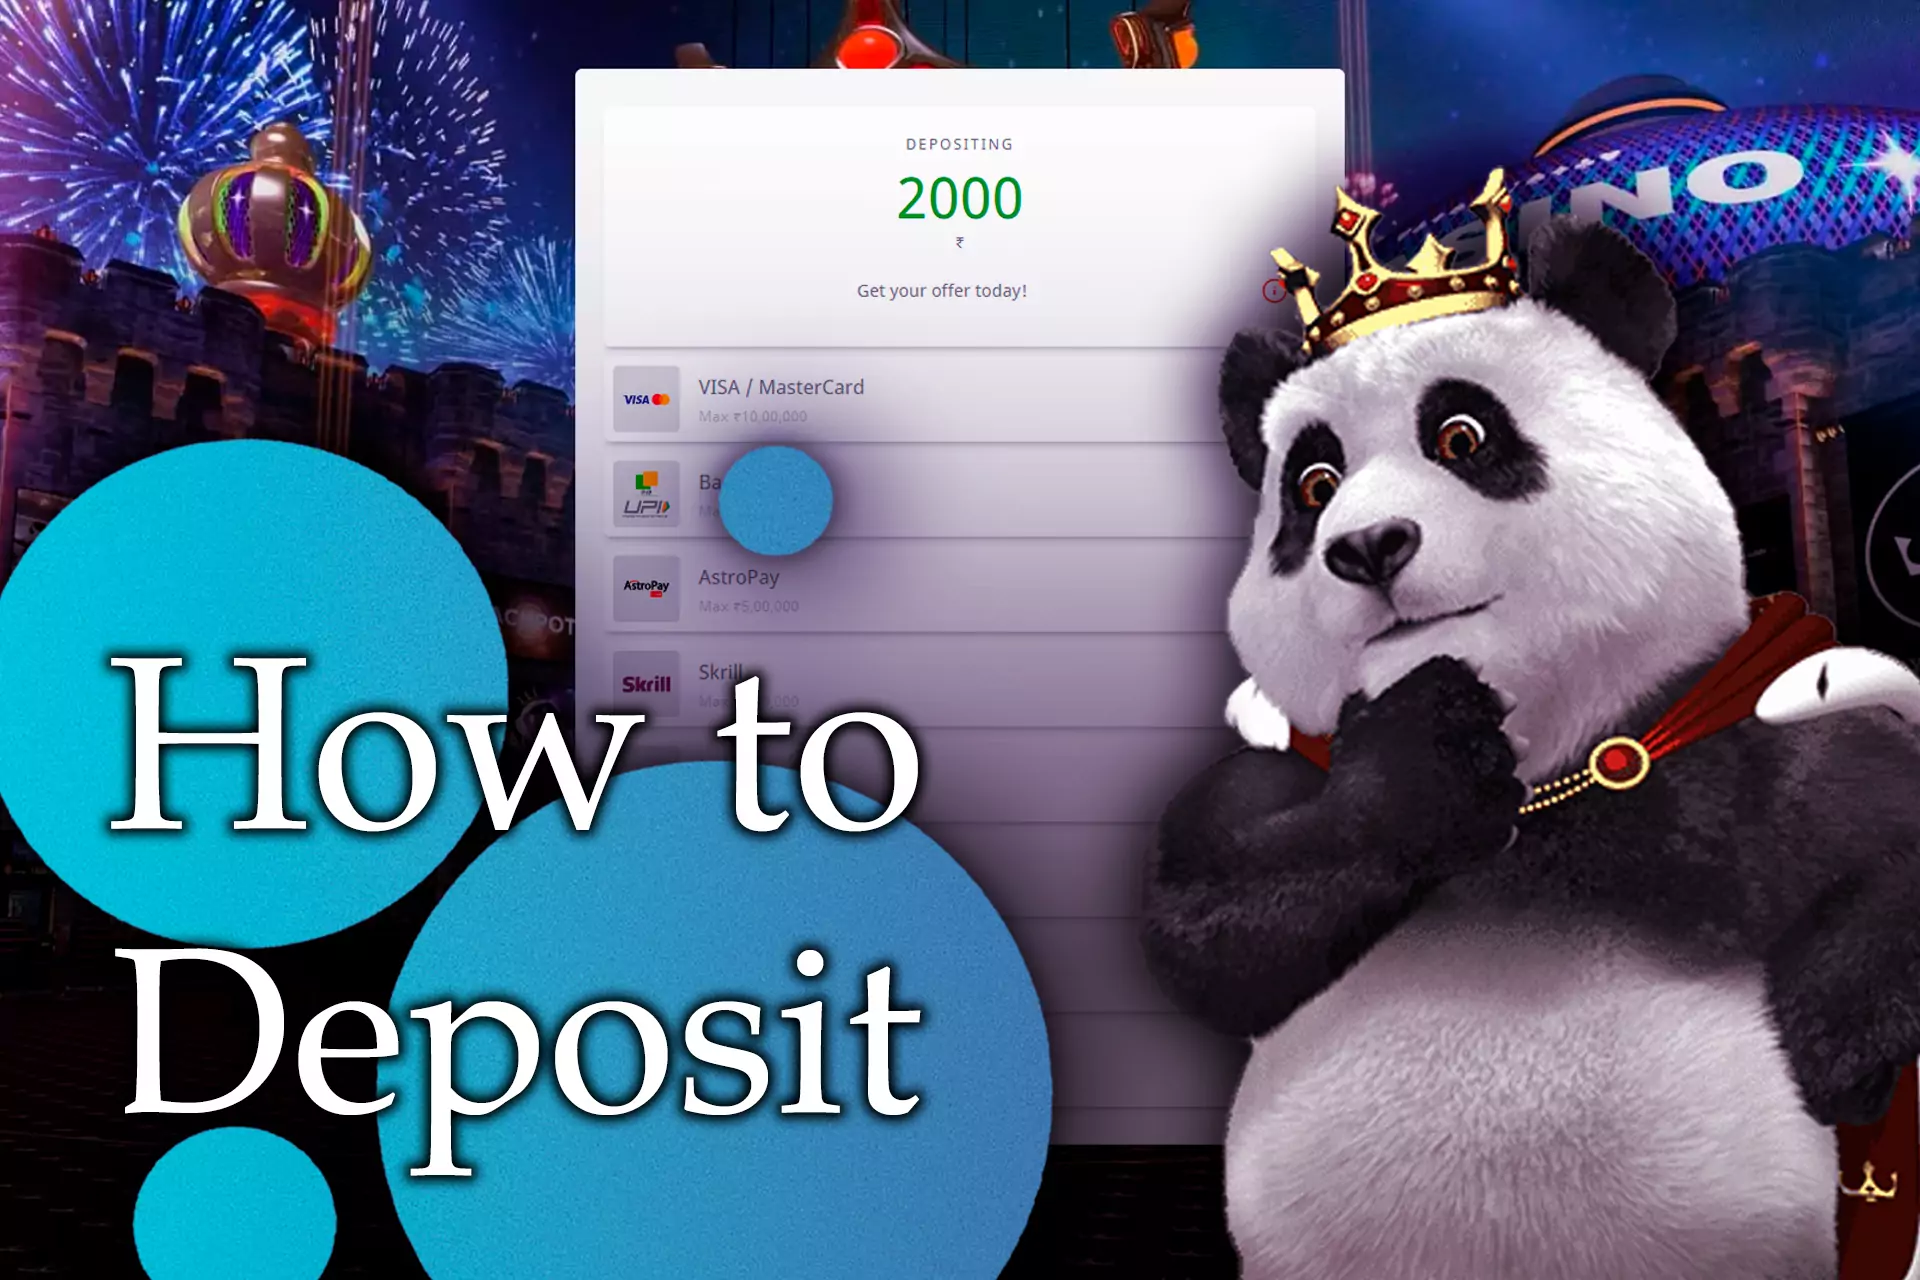 After you create an account, make a deposit to get the bonus and be able to play casino games.